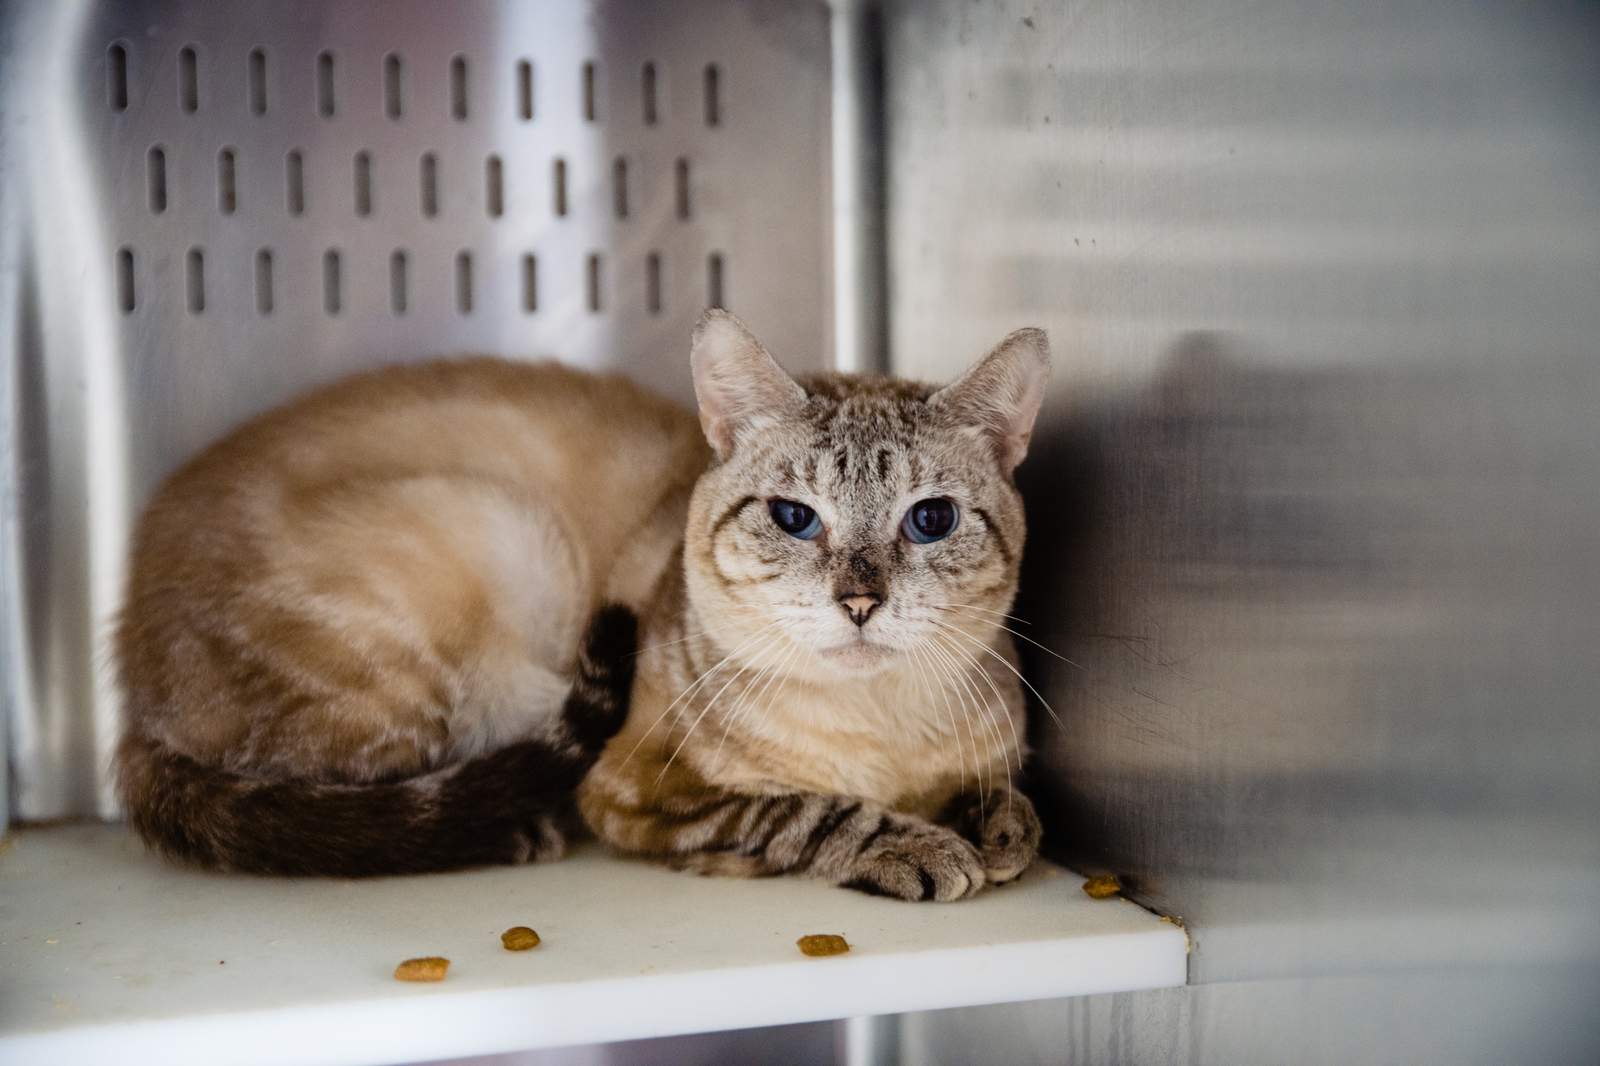 Orange County Animal Services seeking homes for Siamese cats after 40 cats surrendered